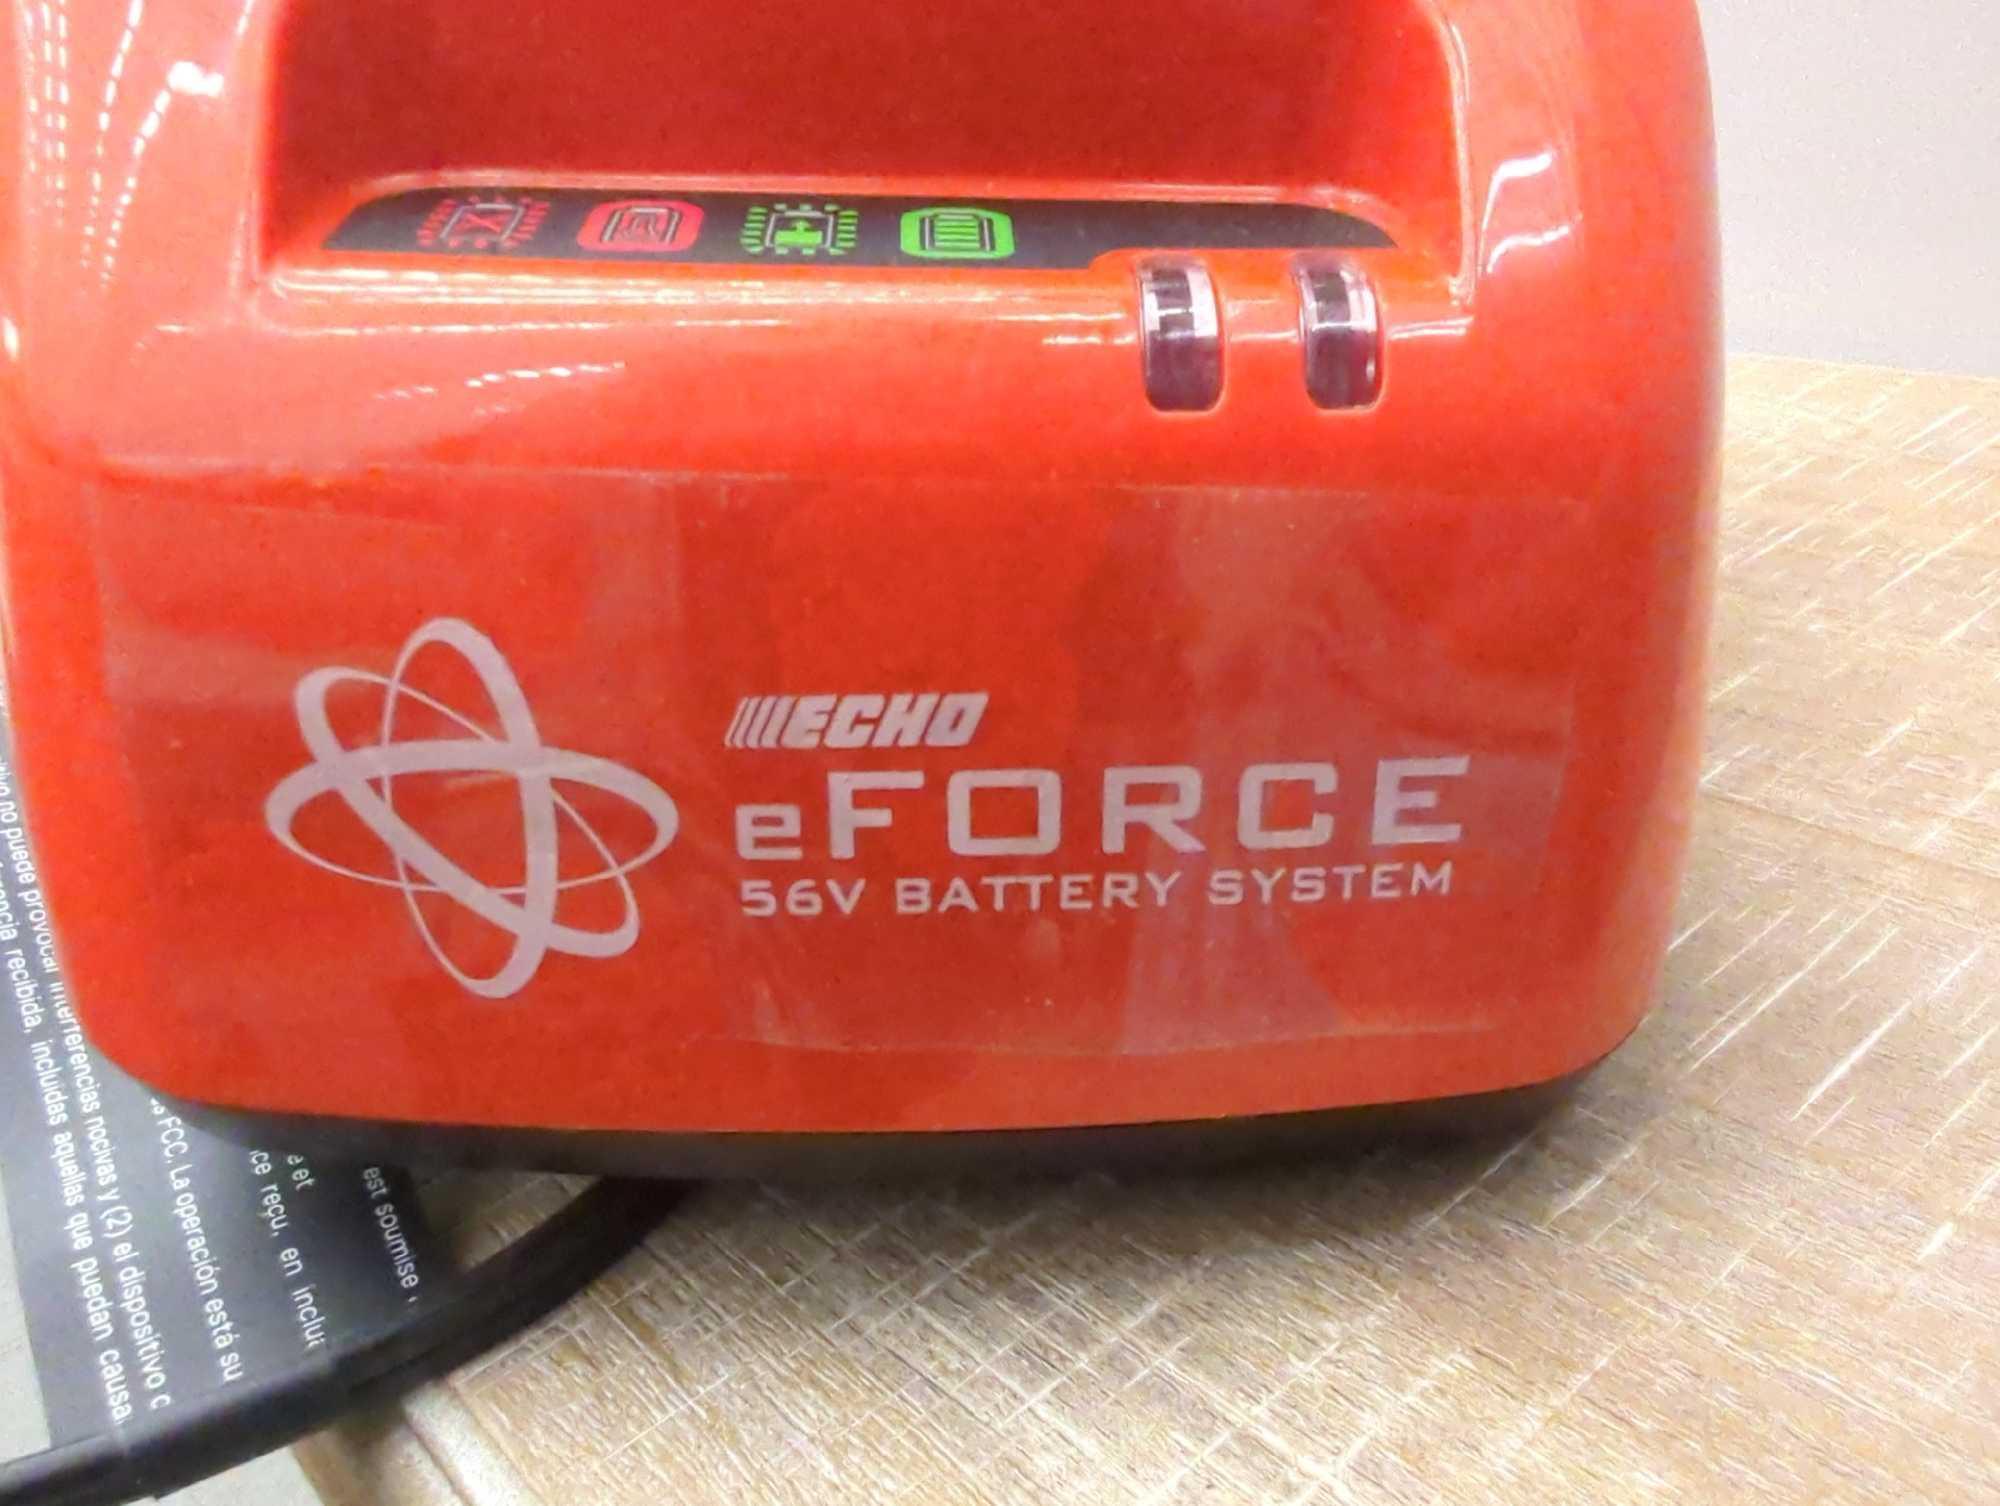 ( No Battery) ECHO eFORCE 56V Standard Charger, NO BATTERY Appears to be New Out of the Package